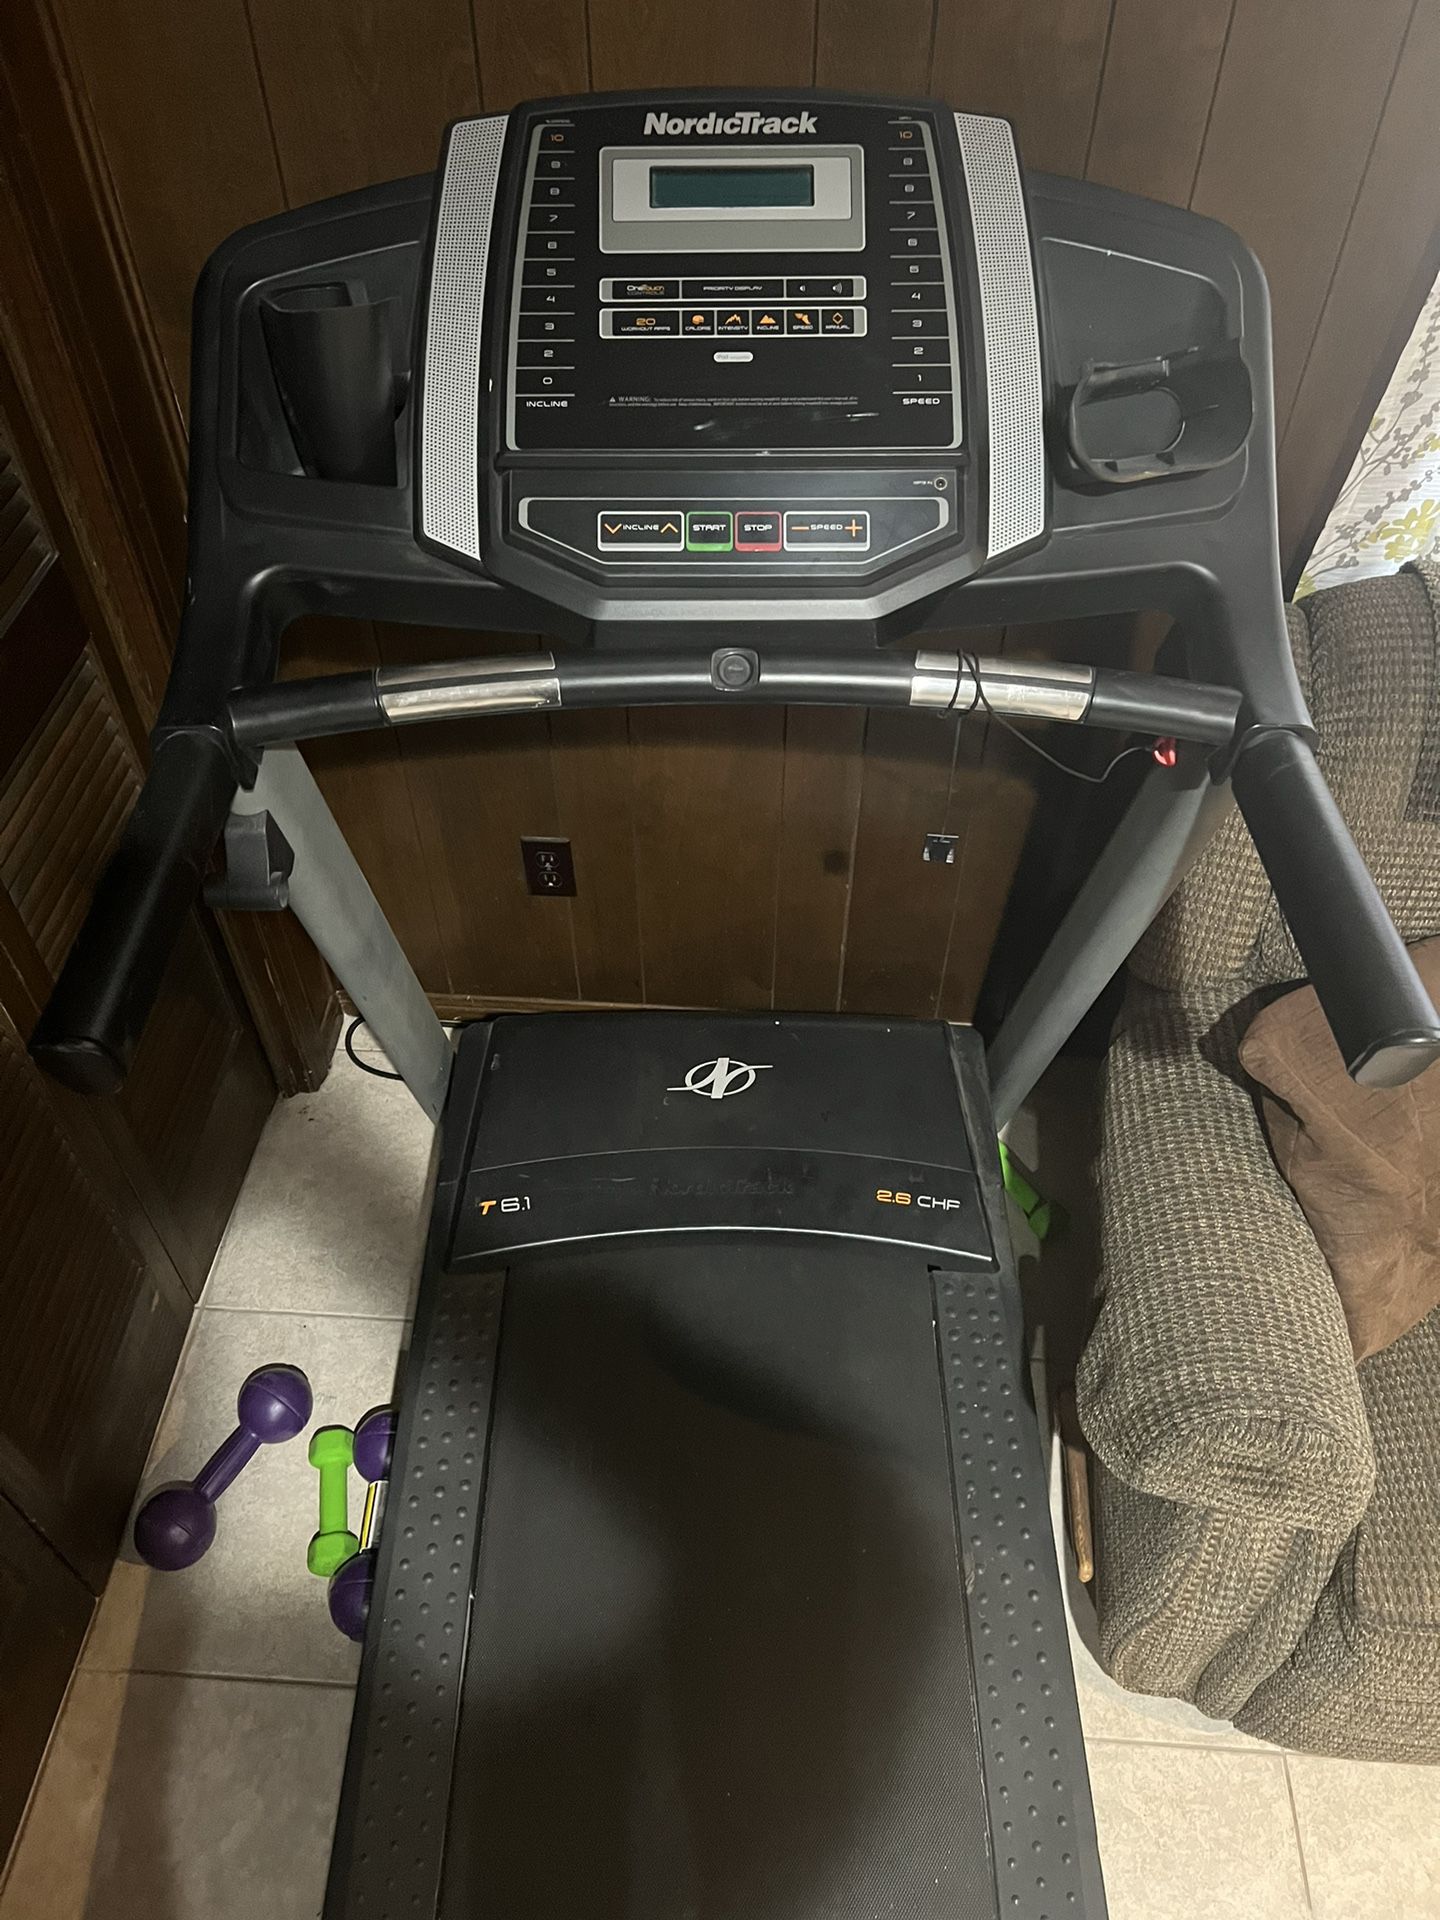 NordicTrack Tread Mill and Elliptical 